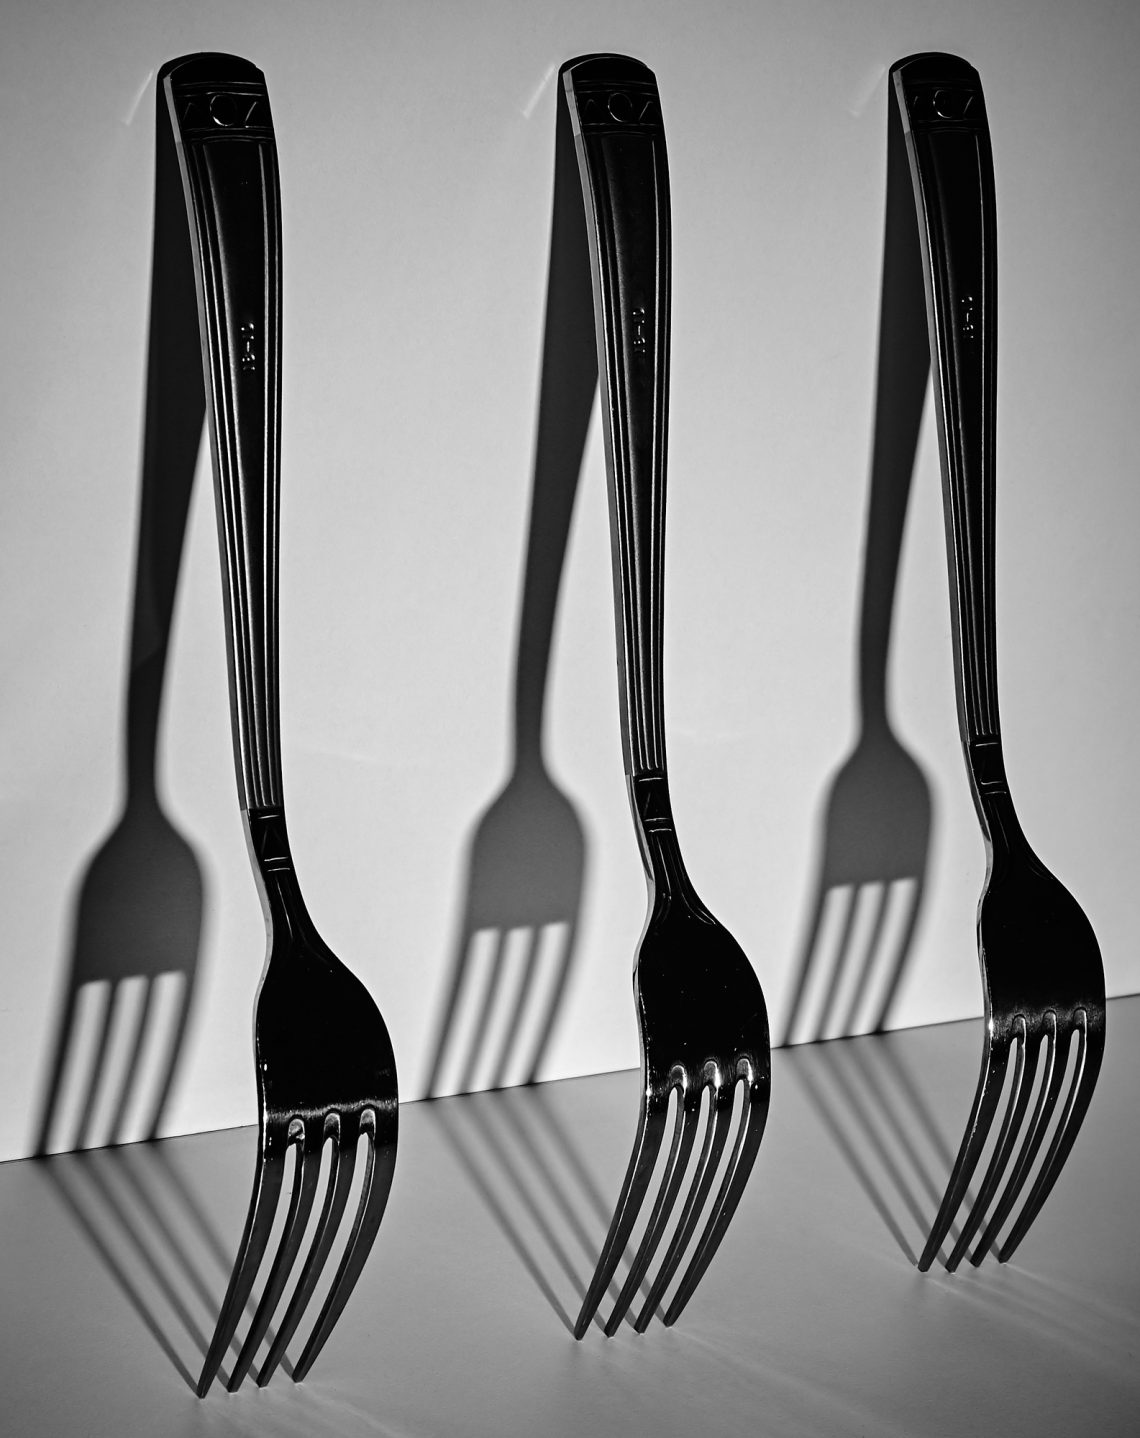 Black-and-white photo of Metal forks